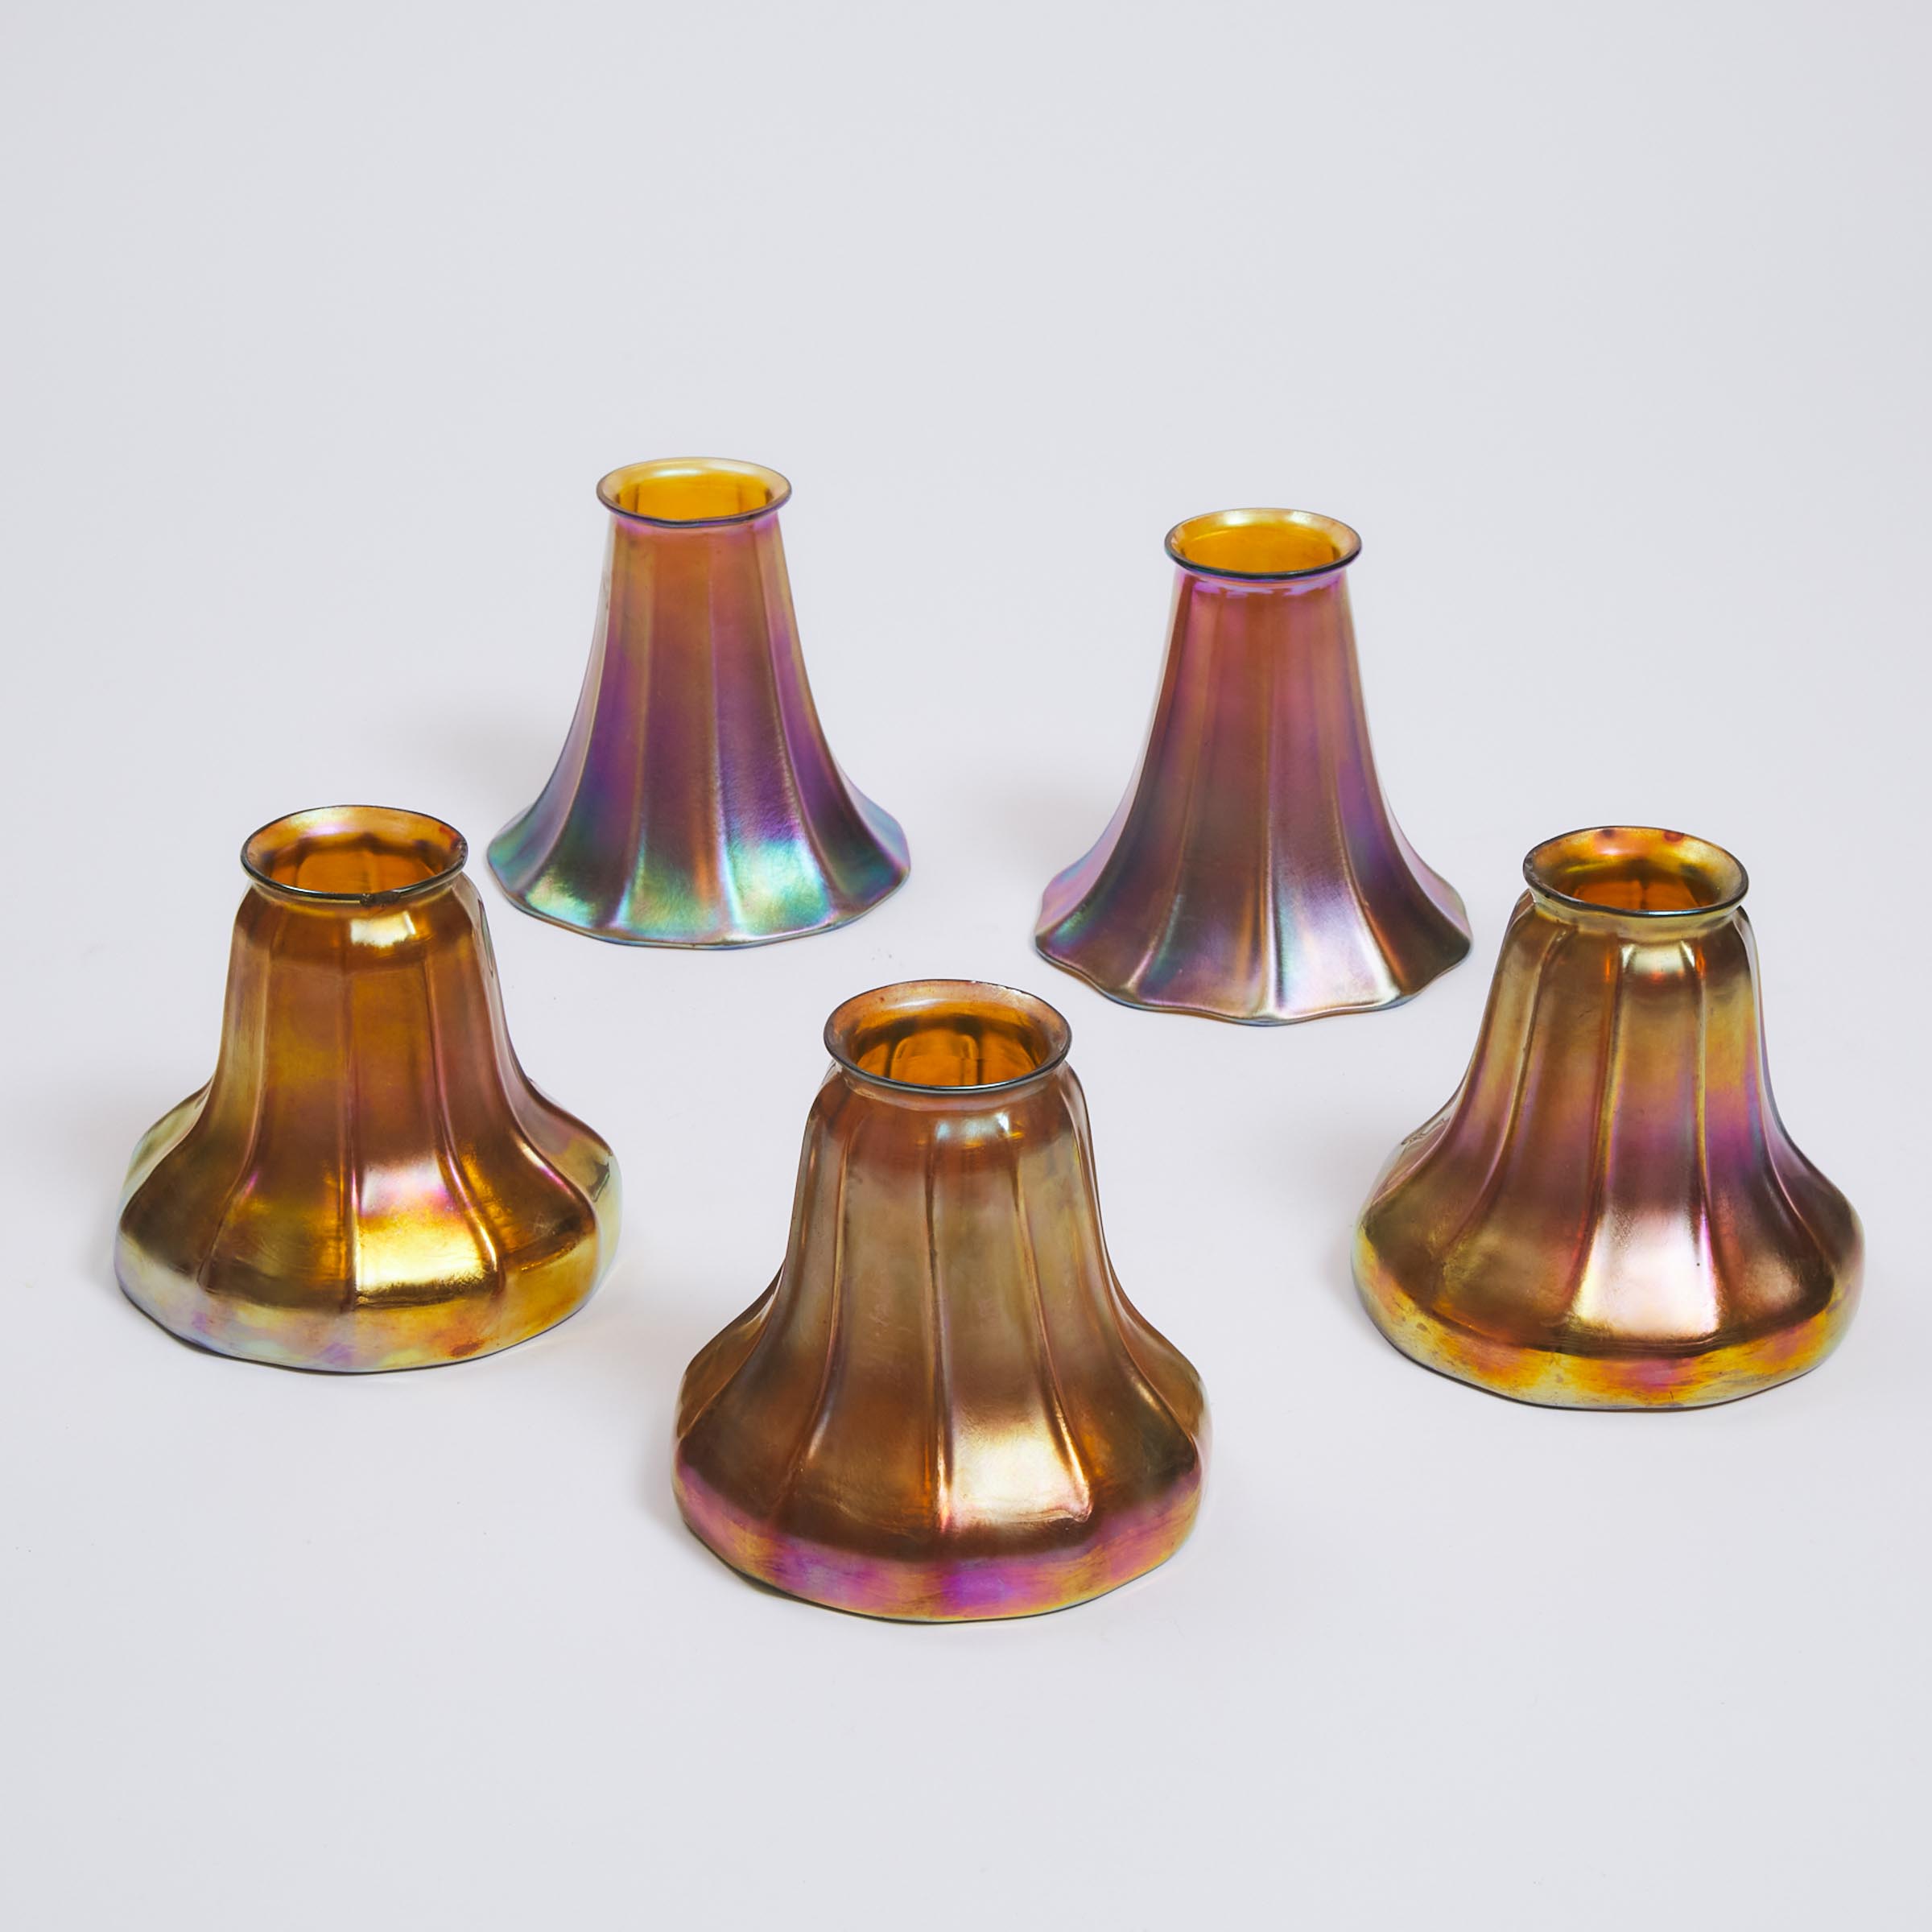 Five American Iridescent Glass Shades, early 20th century